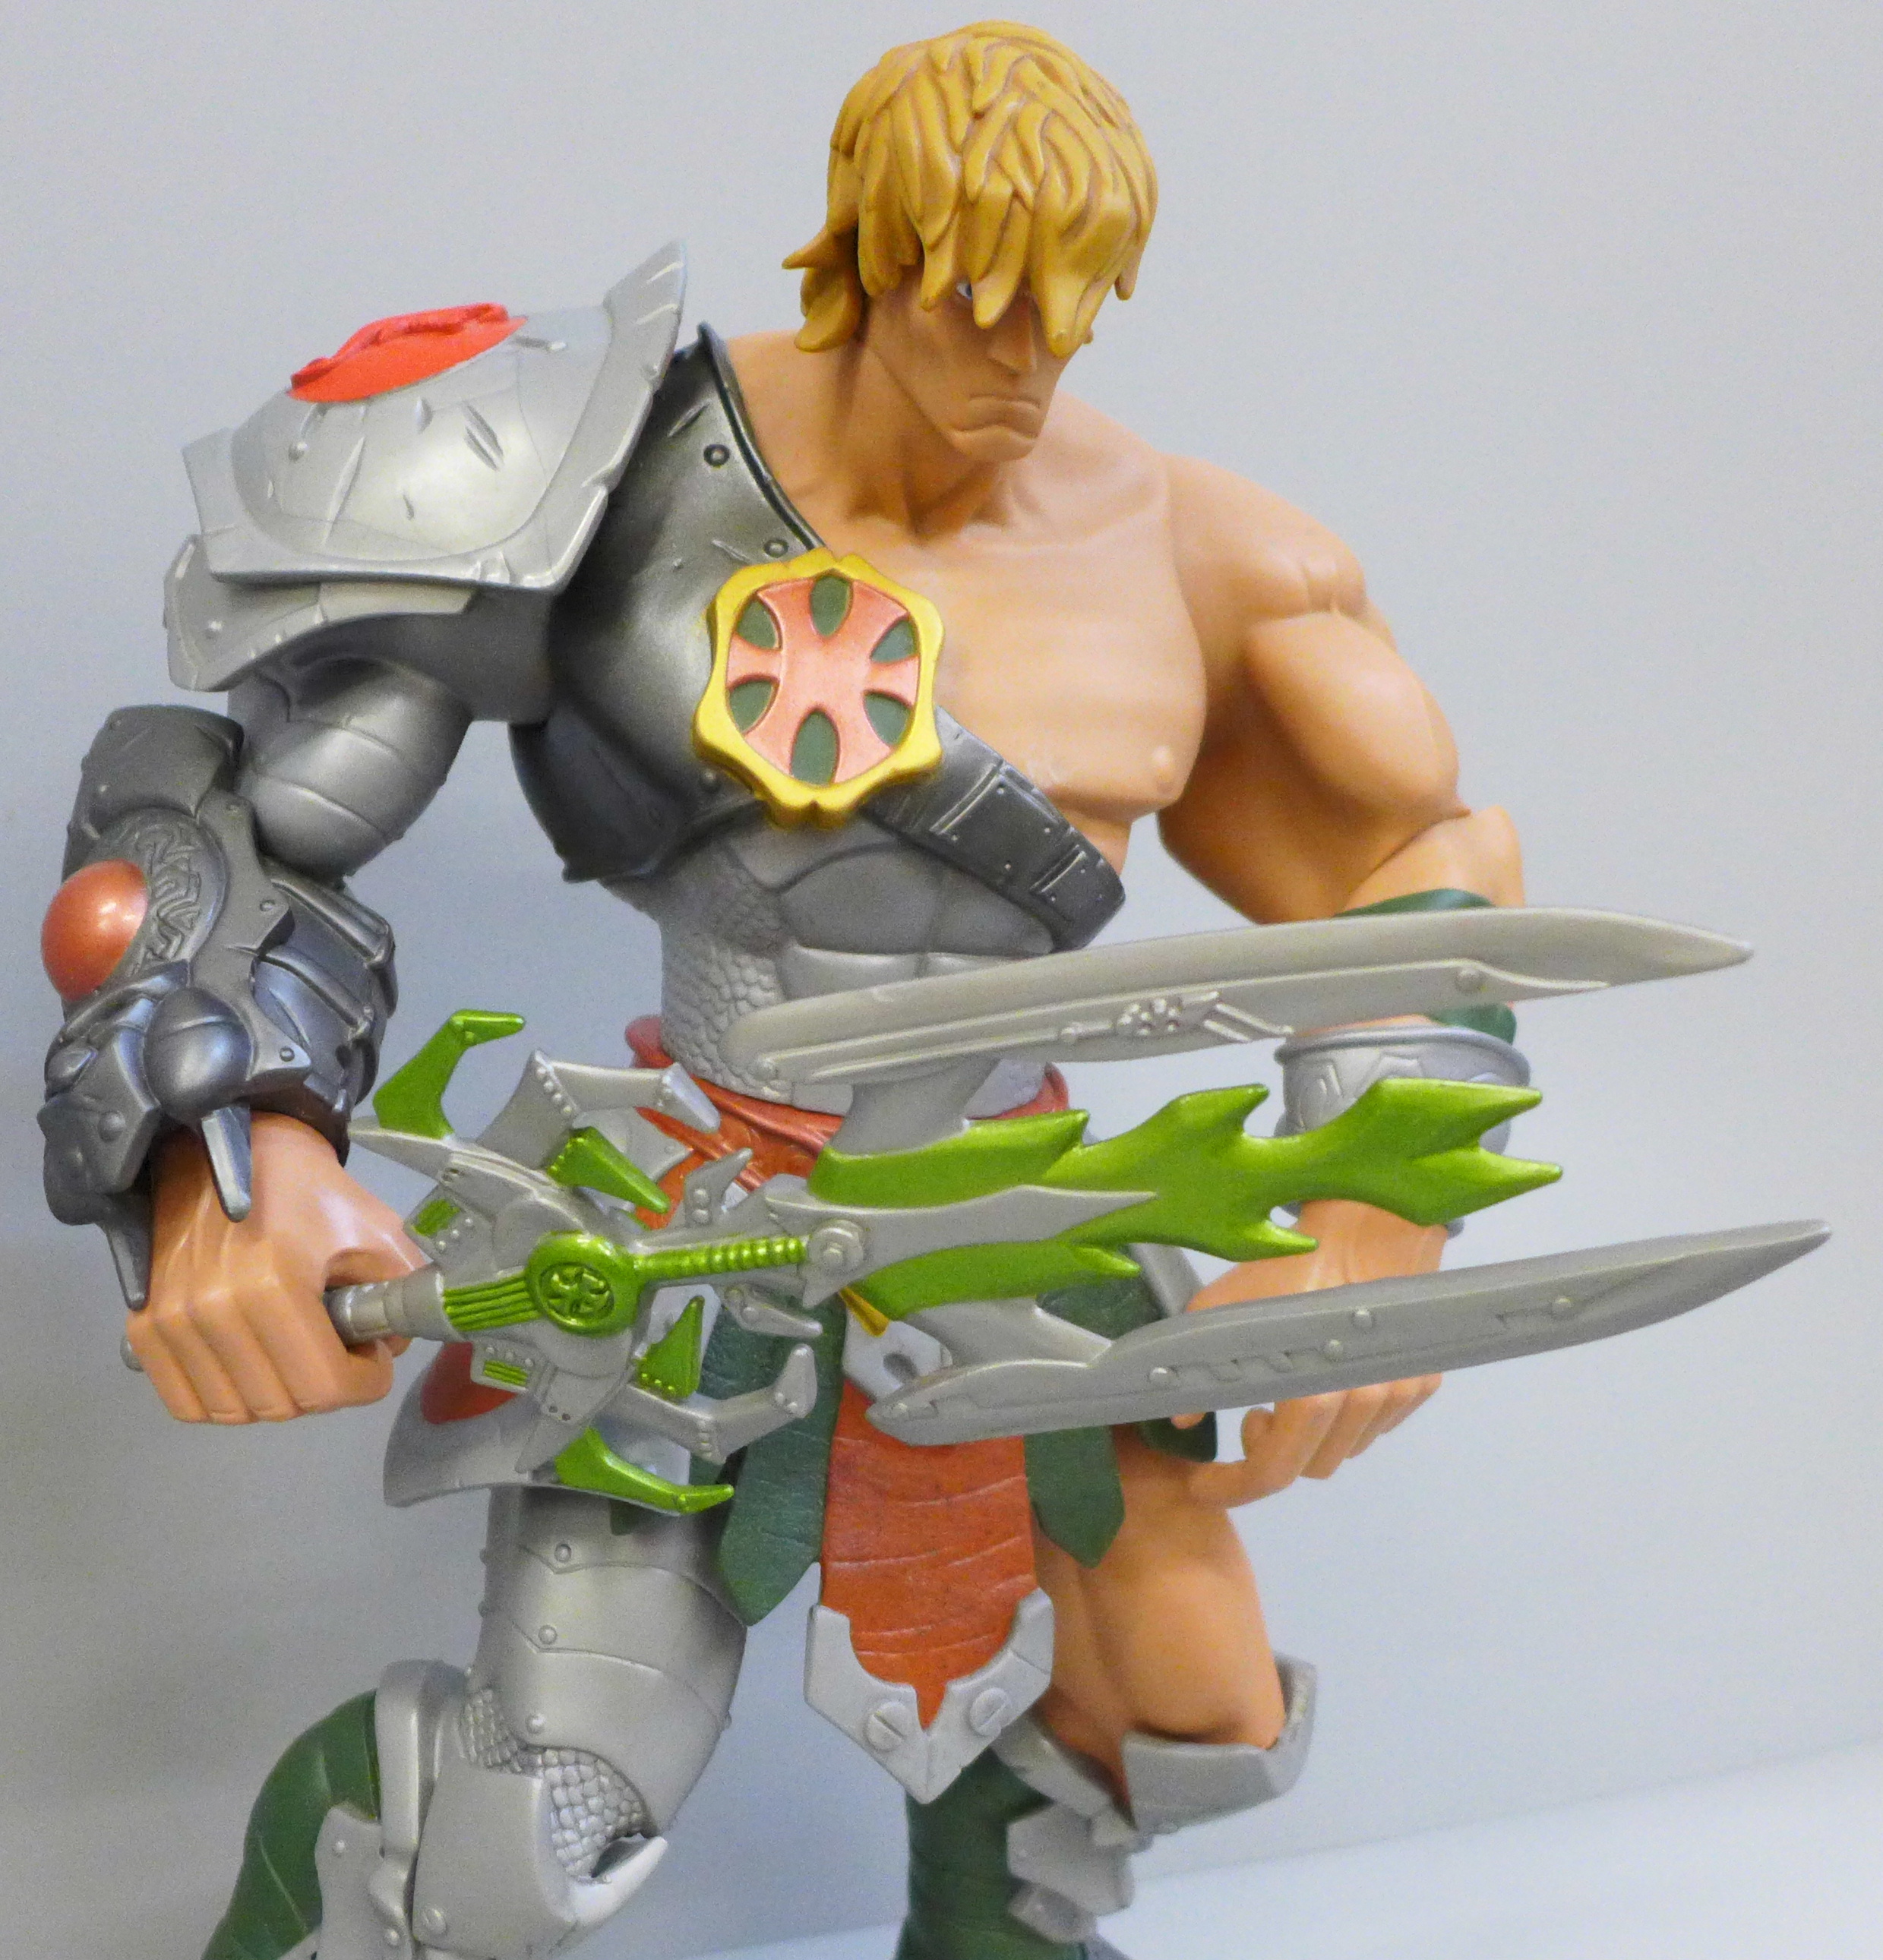 A 12" tall original Mattel He-Man/Masters of the Universe articulated figure from the 1980s - Image 2 of 4